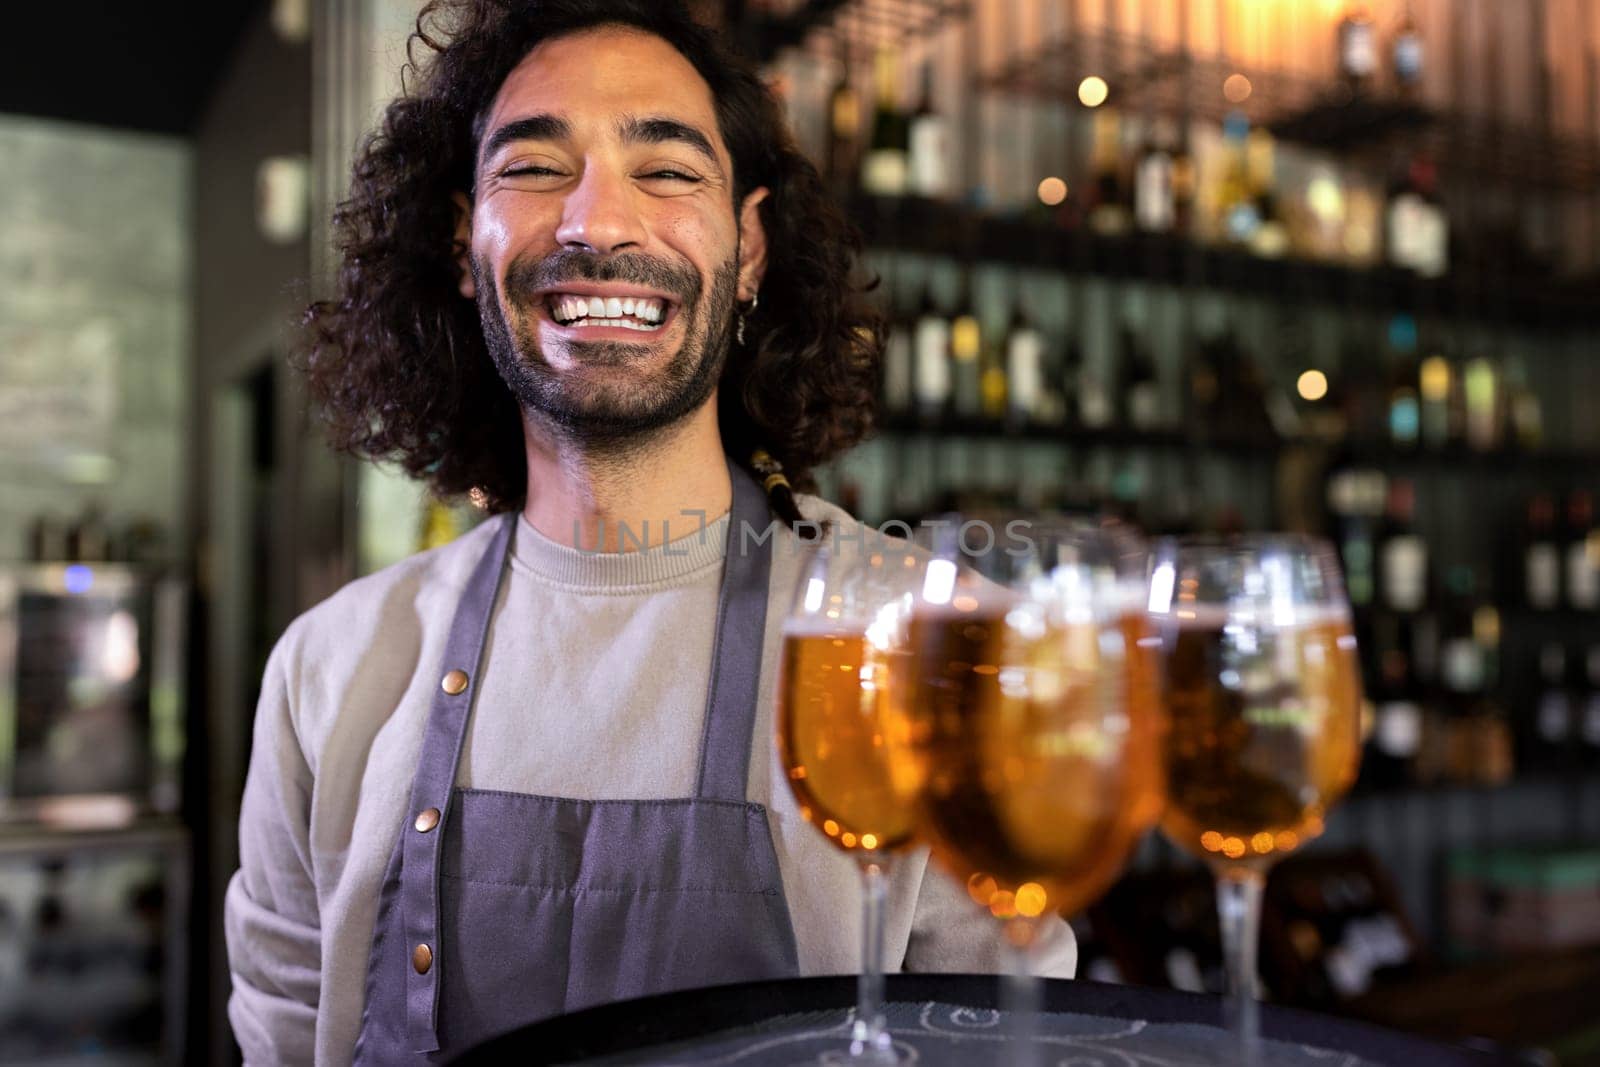 Happy smiling young waiter wearing apron standing in bar holding tray of beers looking at camera. Restaurant concept.